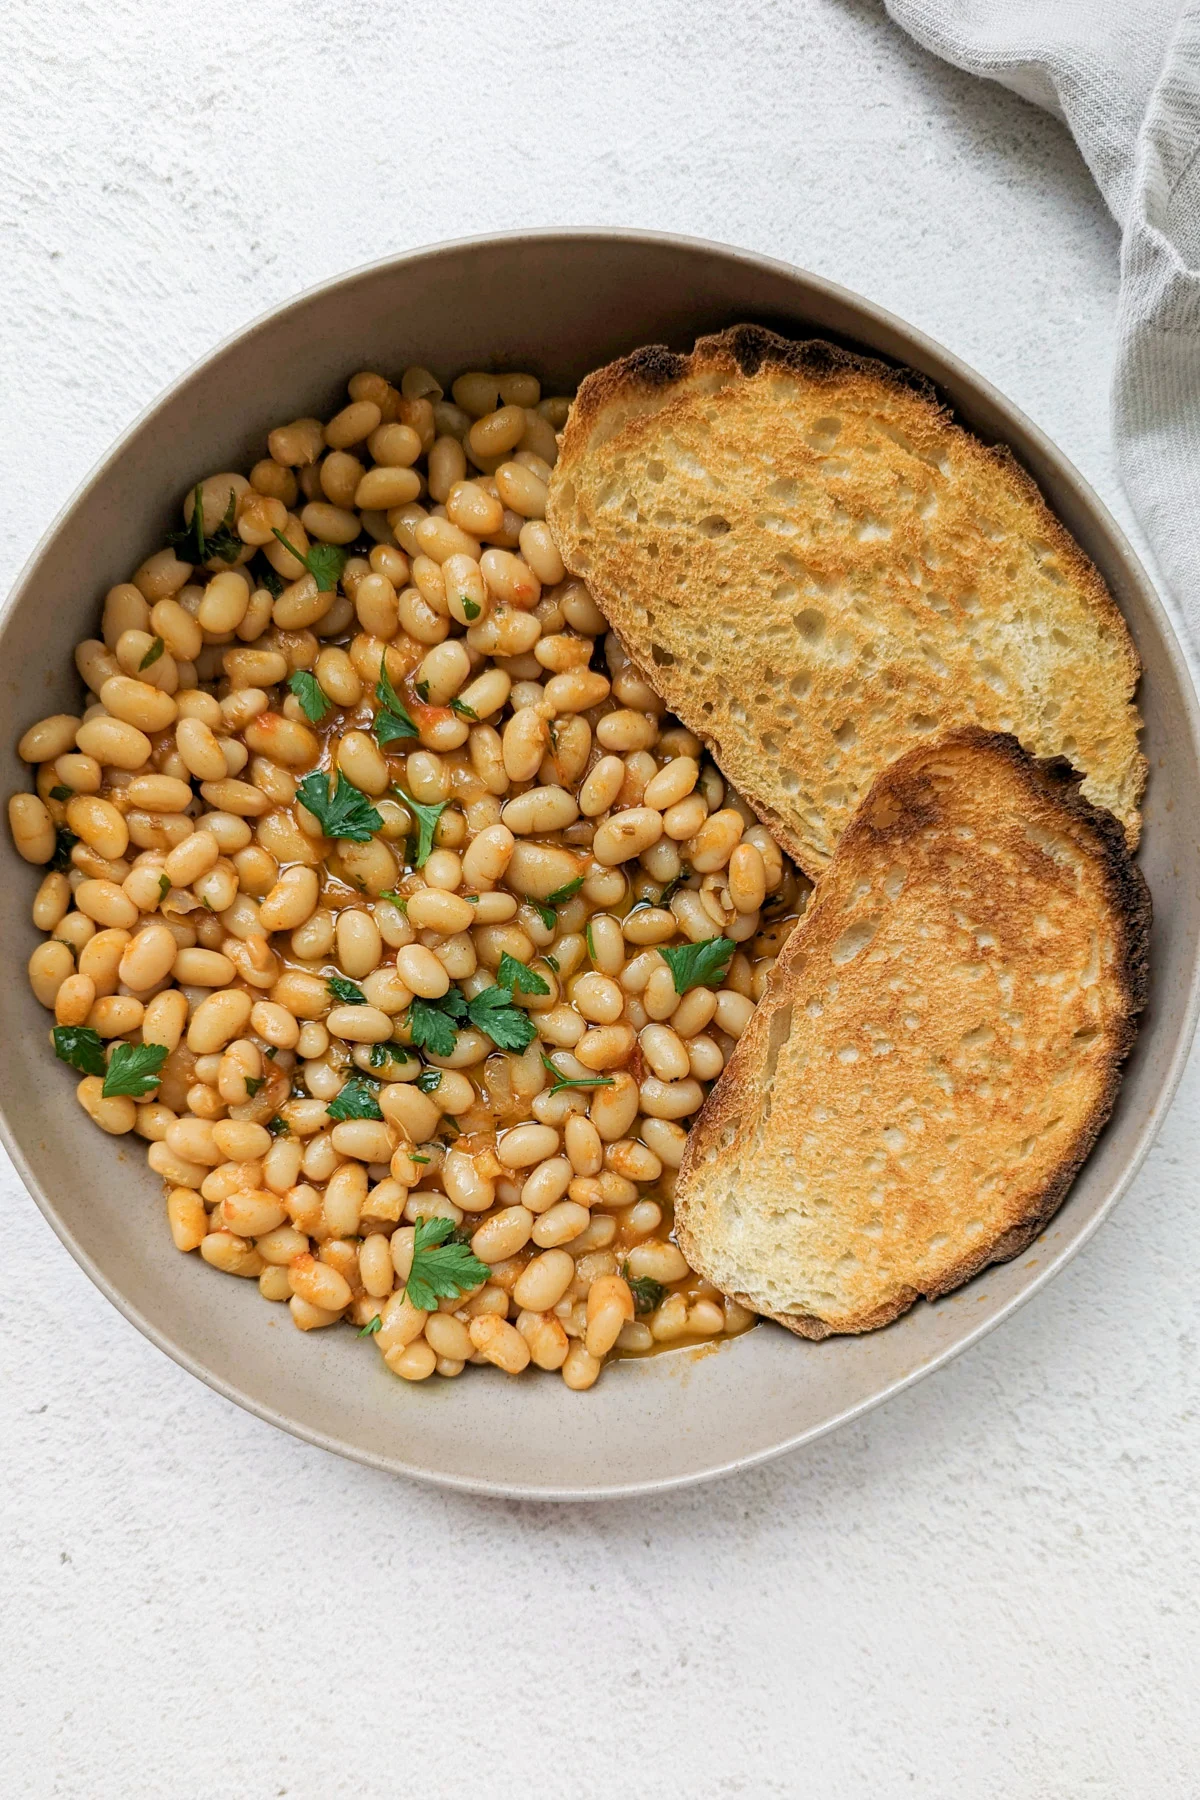 Loubia on a plate with crusty bread.